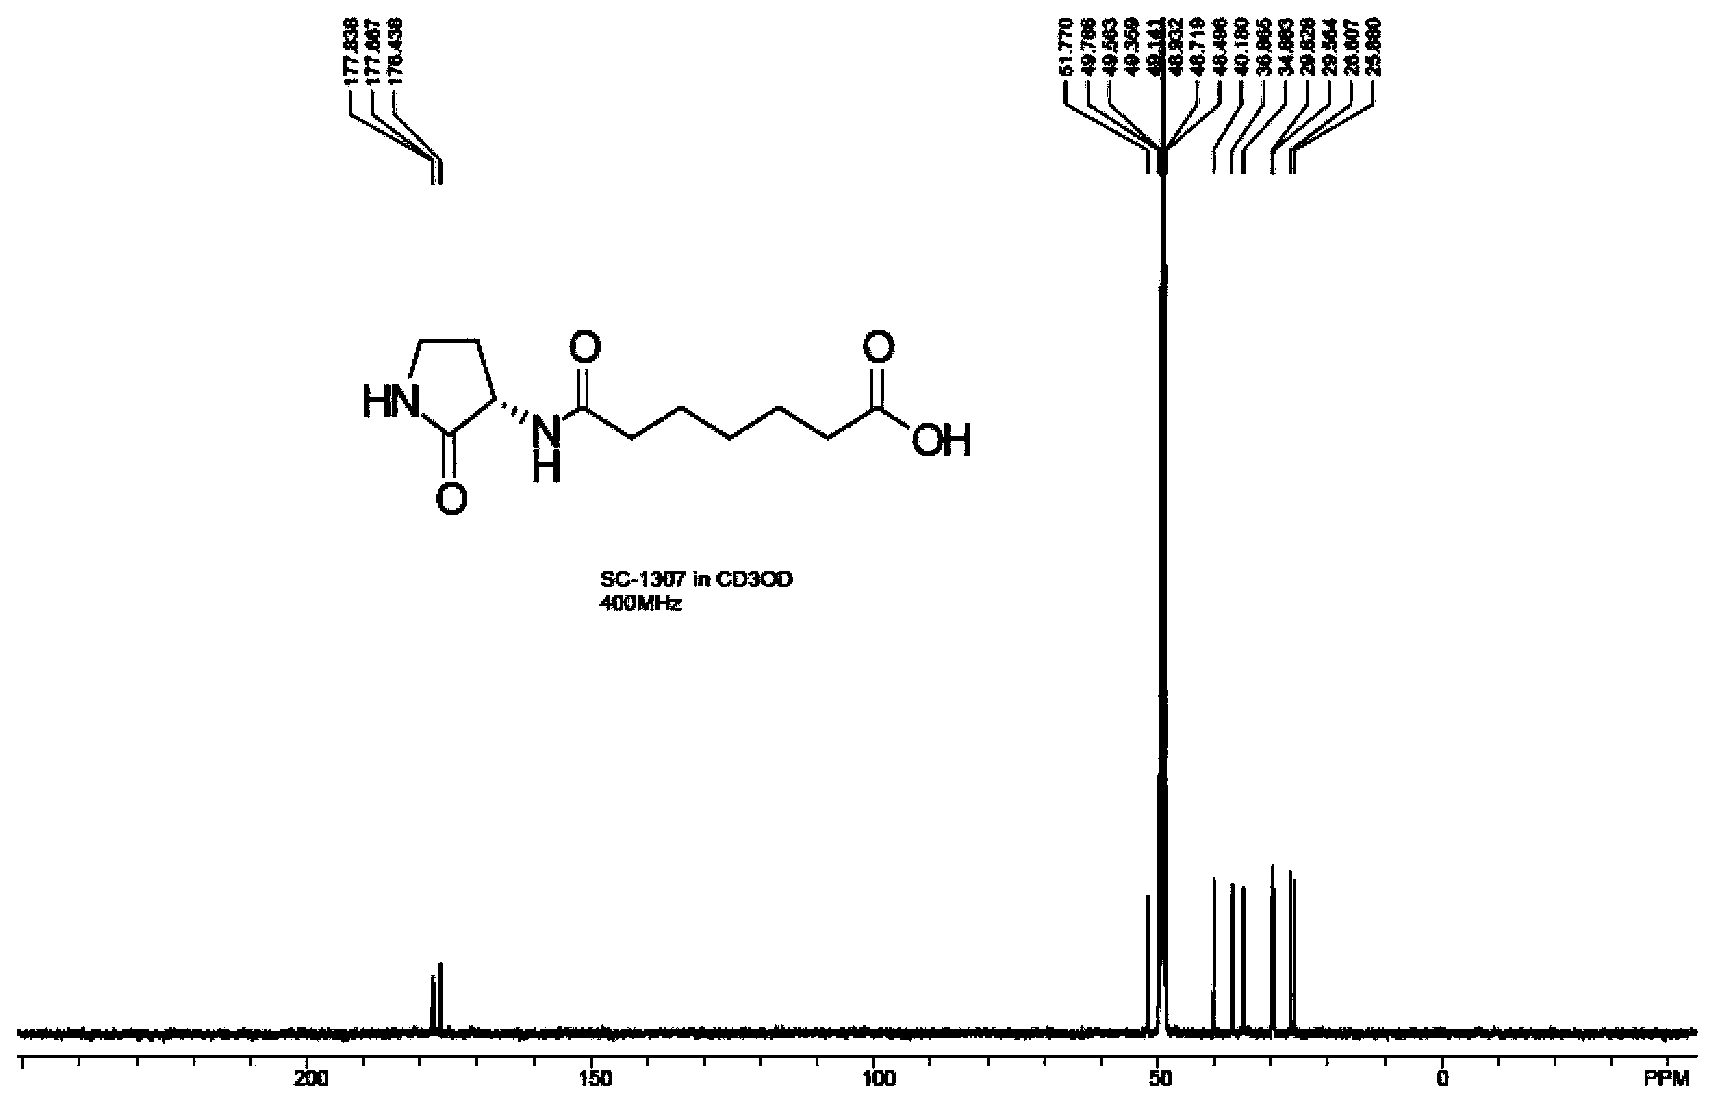 Aptamer capable of simultaneously identifying OdDHL ([N-(3-oxododecanoyl)-L-homoserine lactone]) and BHL (N-butanoyl-L-homoserine lactone) and application thereof